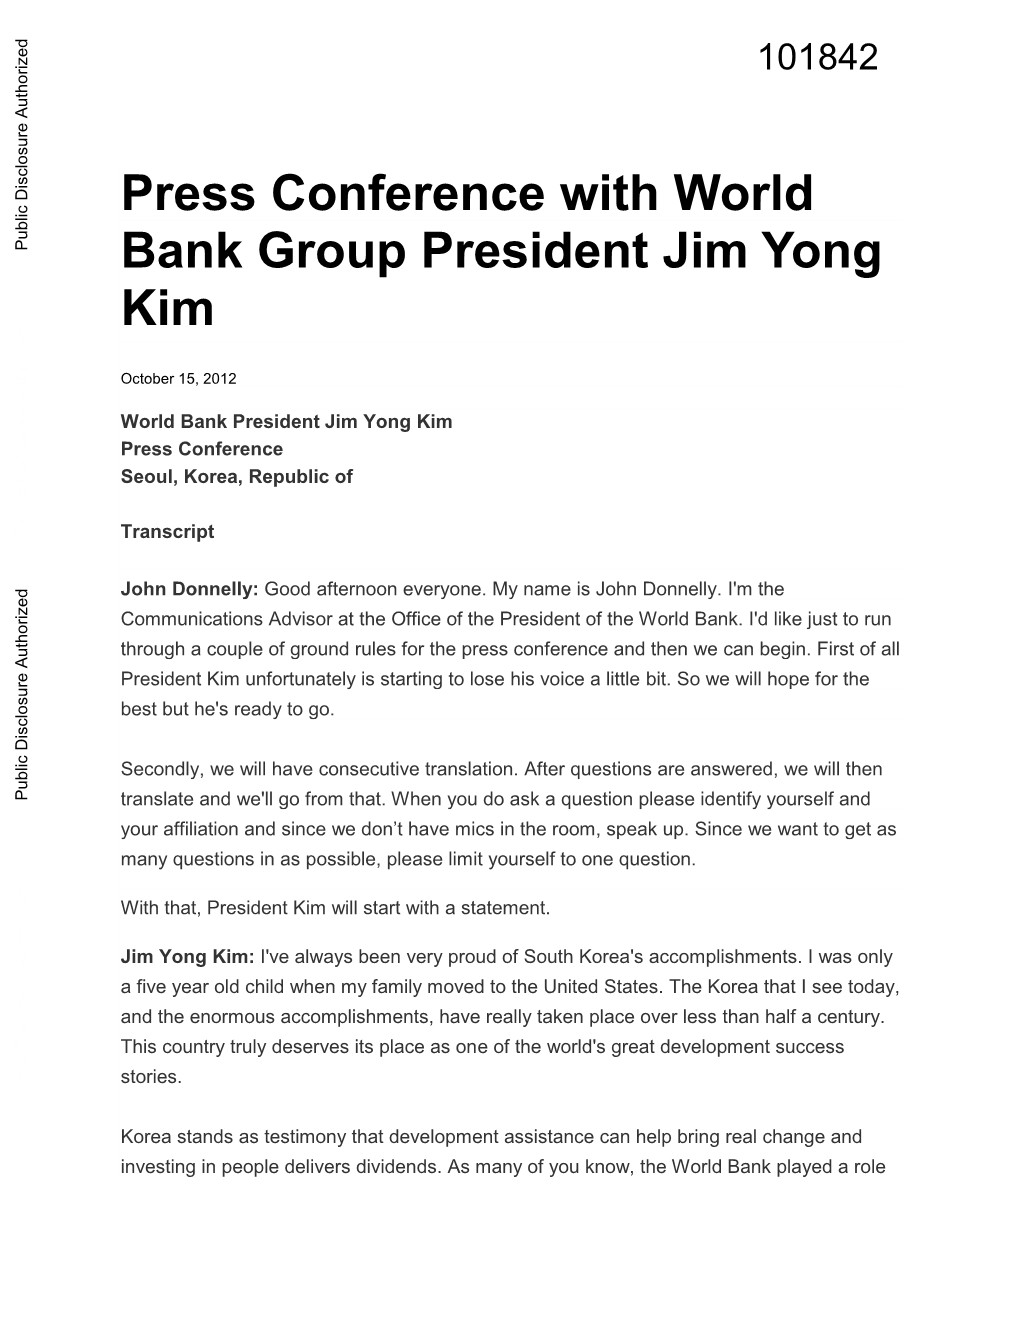 Press Conference with World Bank Group President Jim Yong